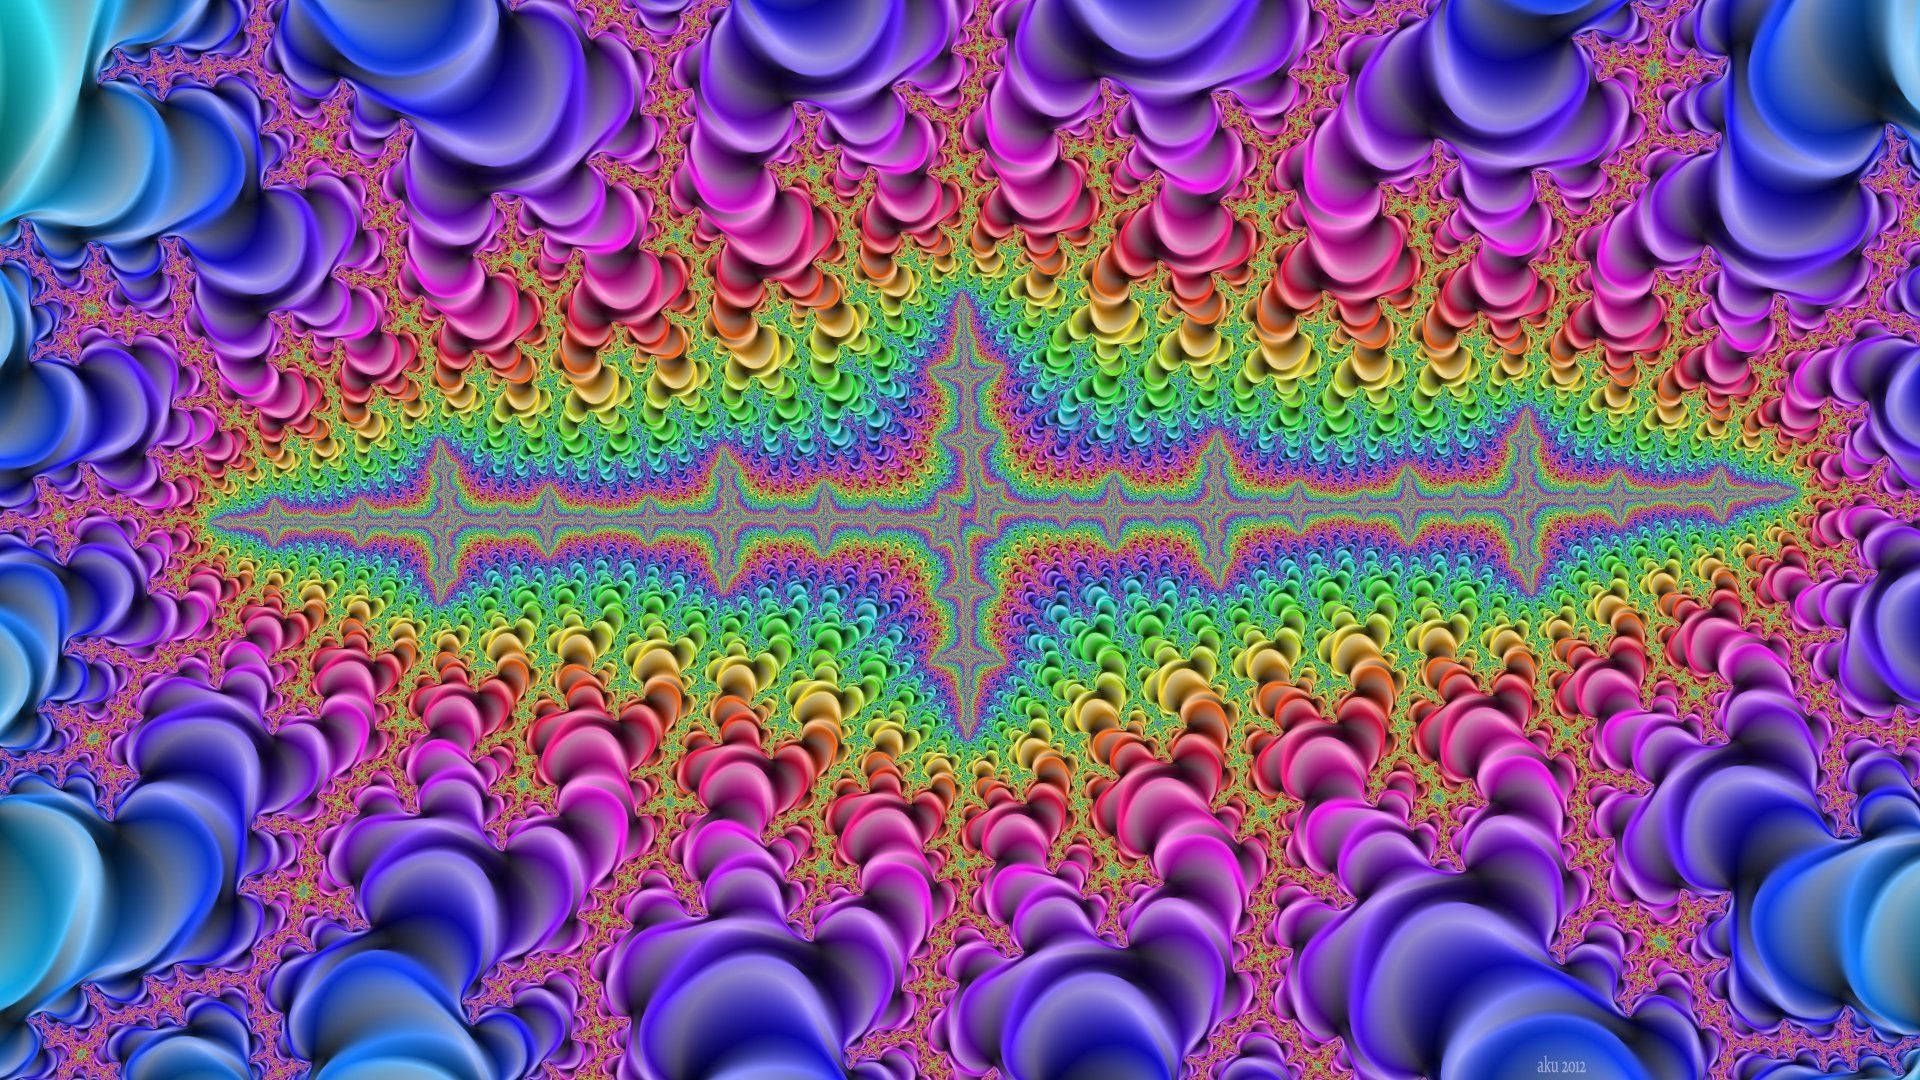 A colorful fractal pattern of blue, green, and purple balls. - Psychedelic